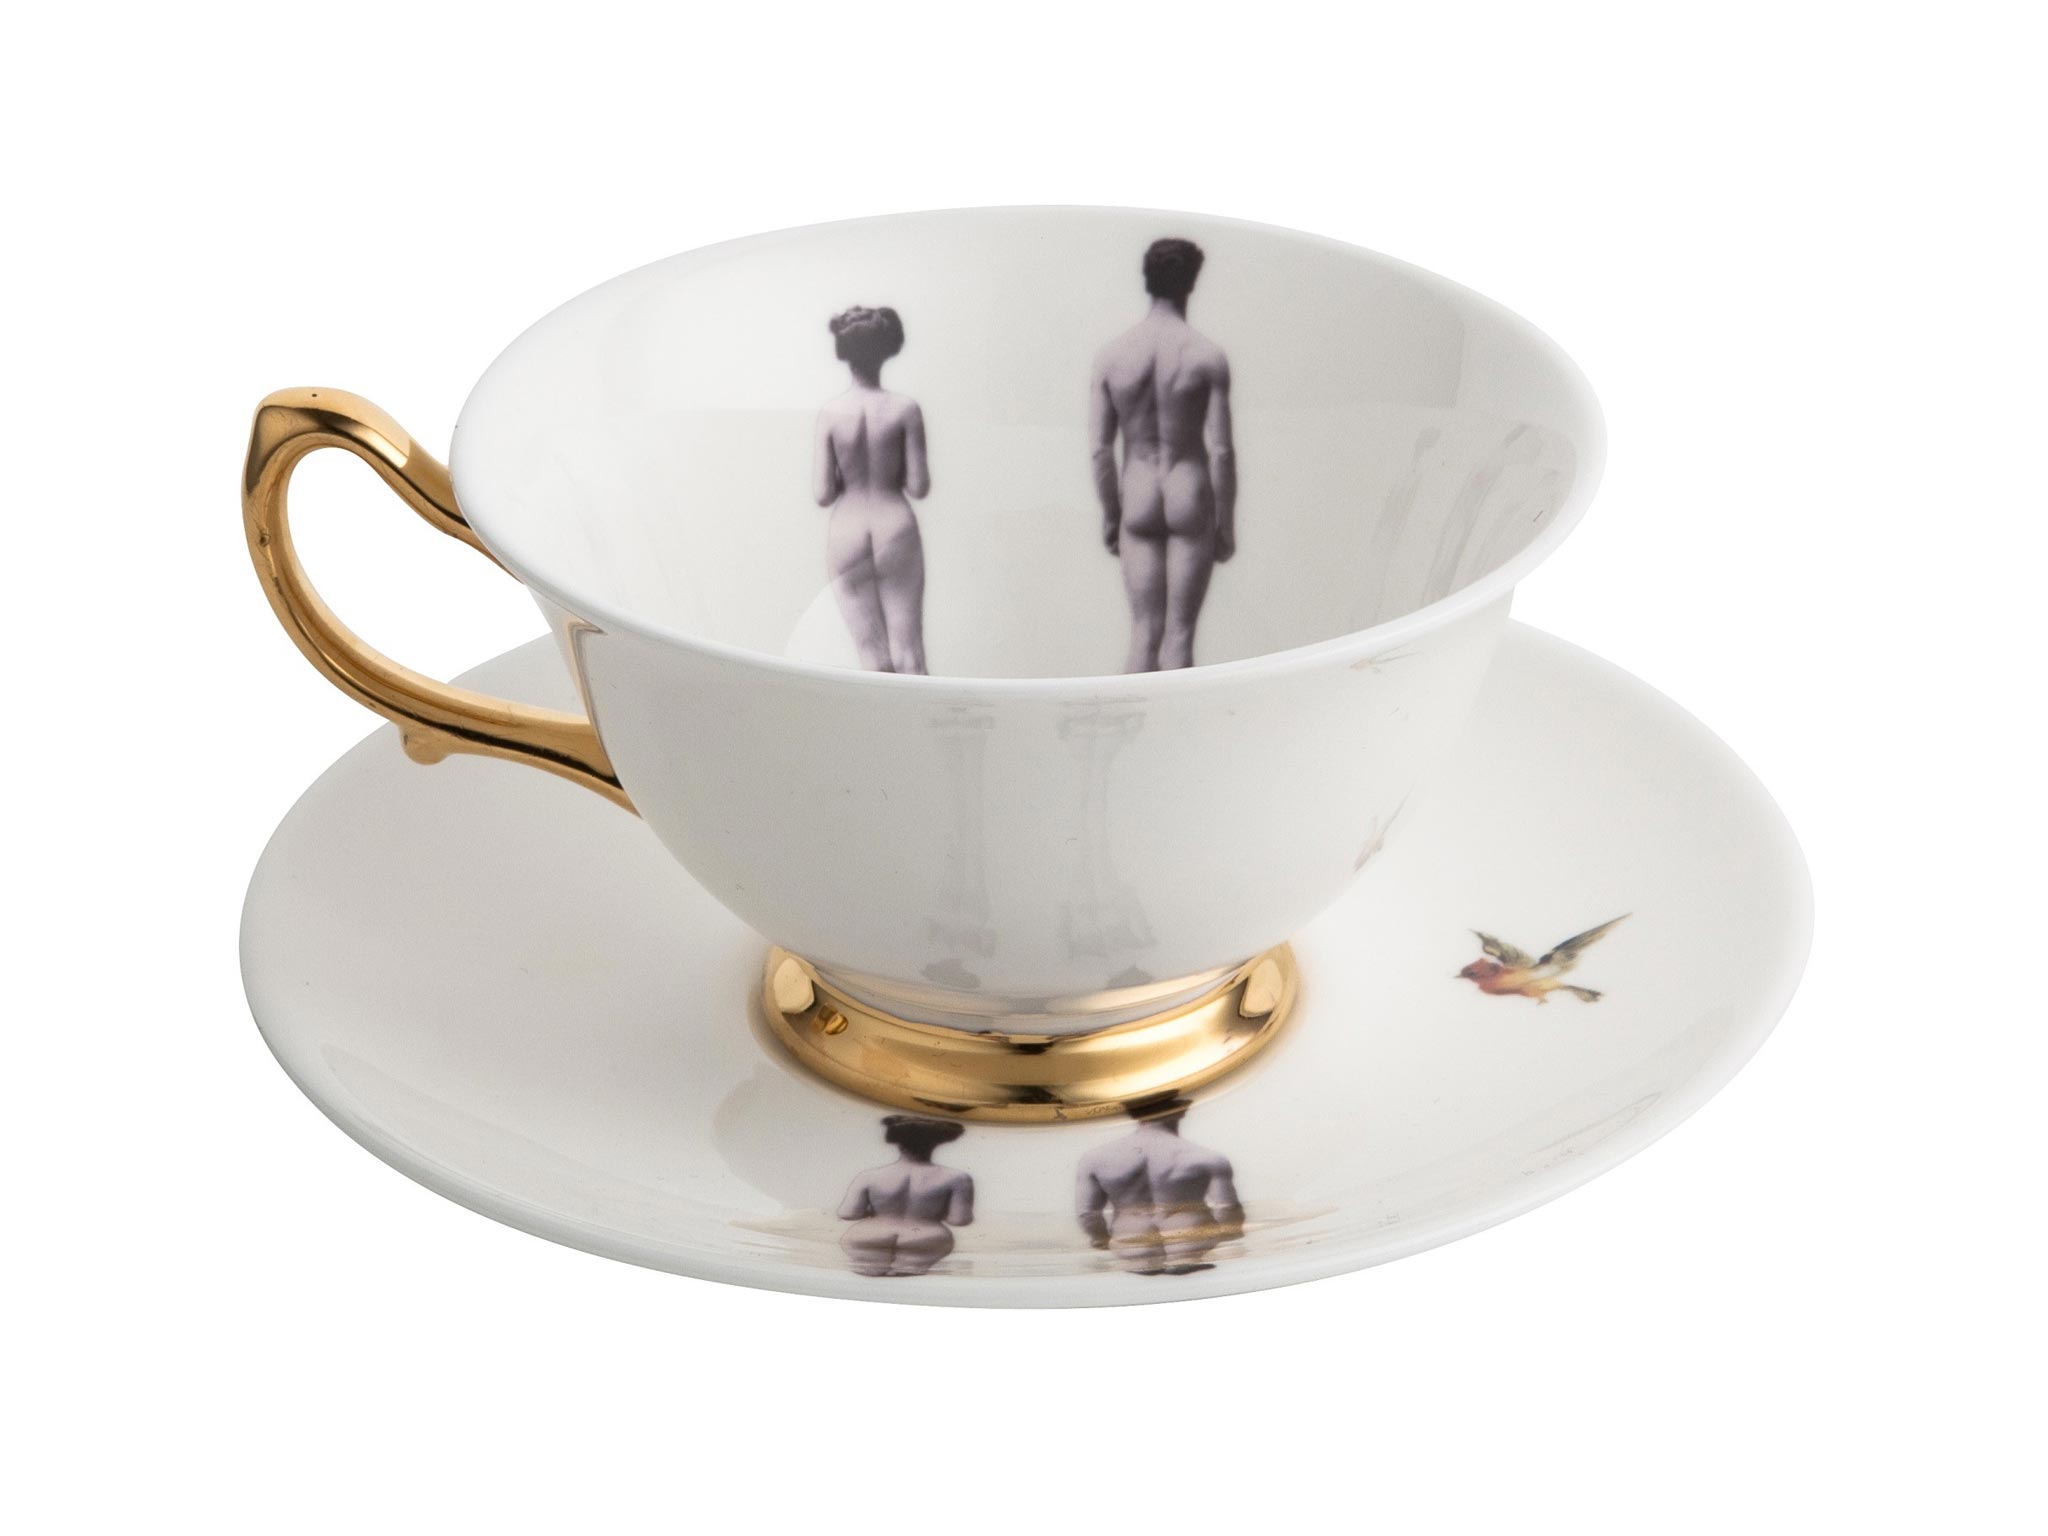 Teapots, cups and cake stands: 10 best tea party pieces